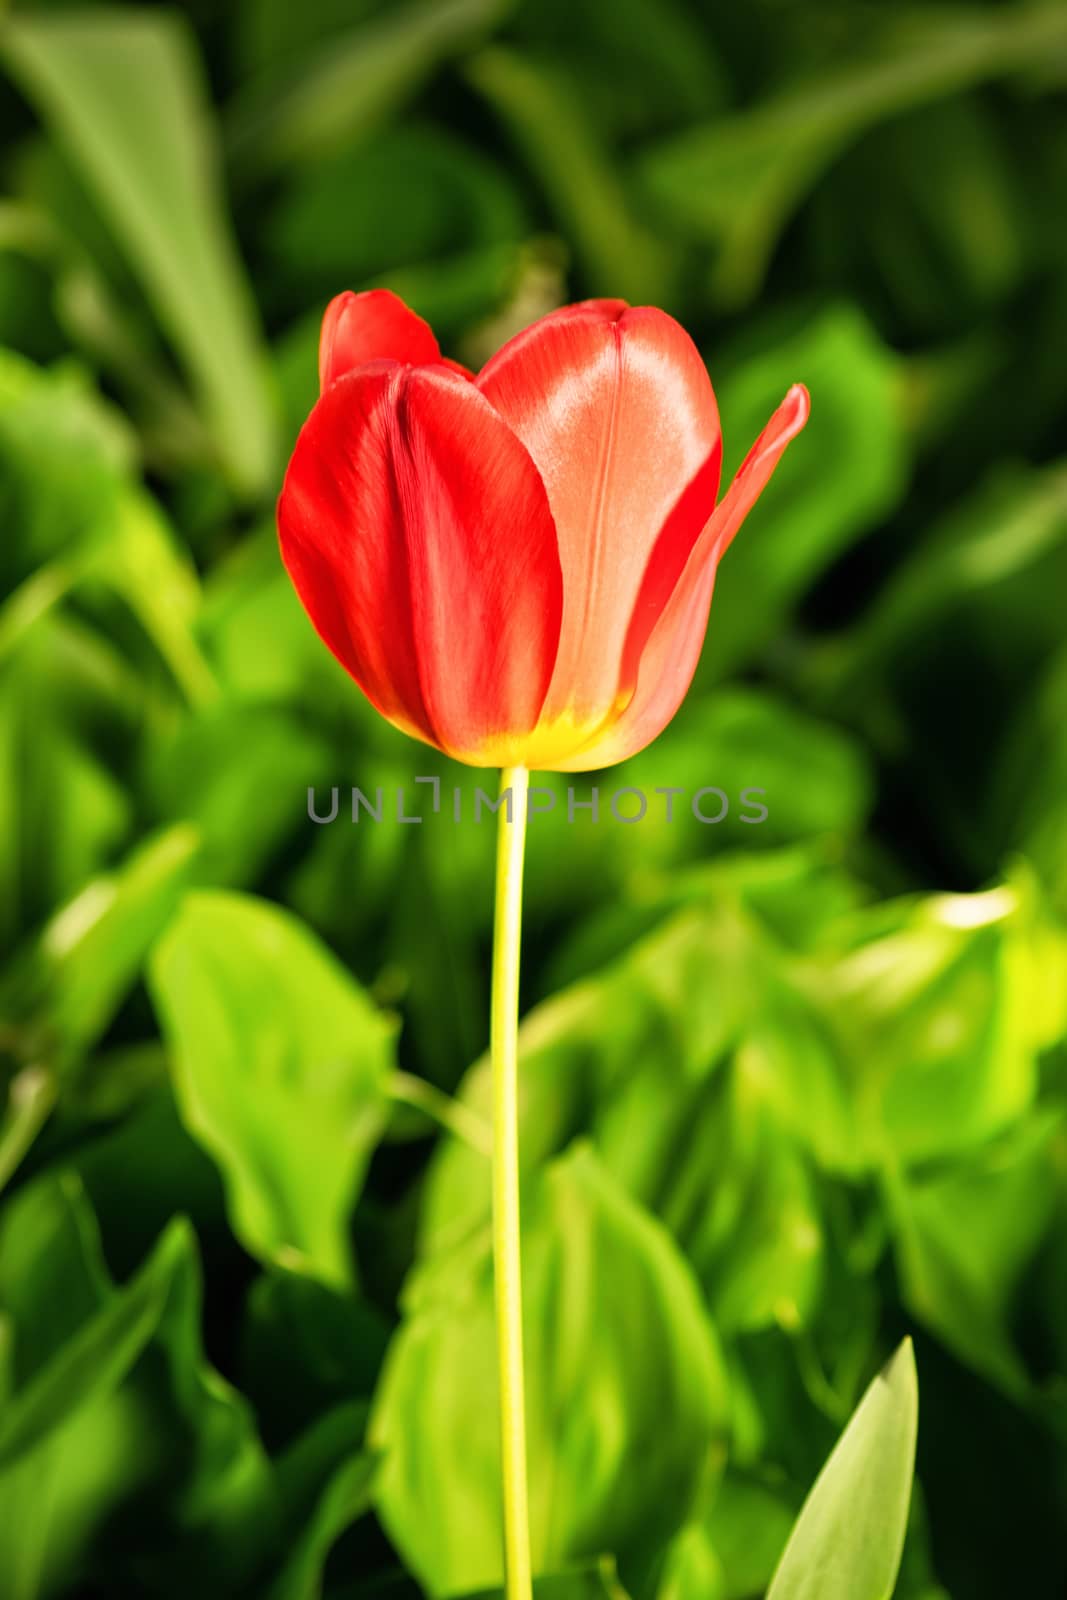 A close up shot of a red tulip in bloom with background of greenery.